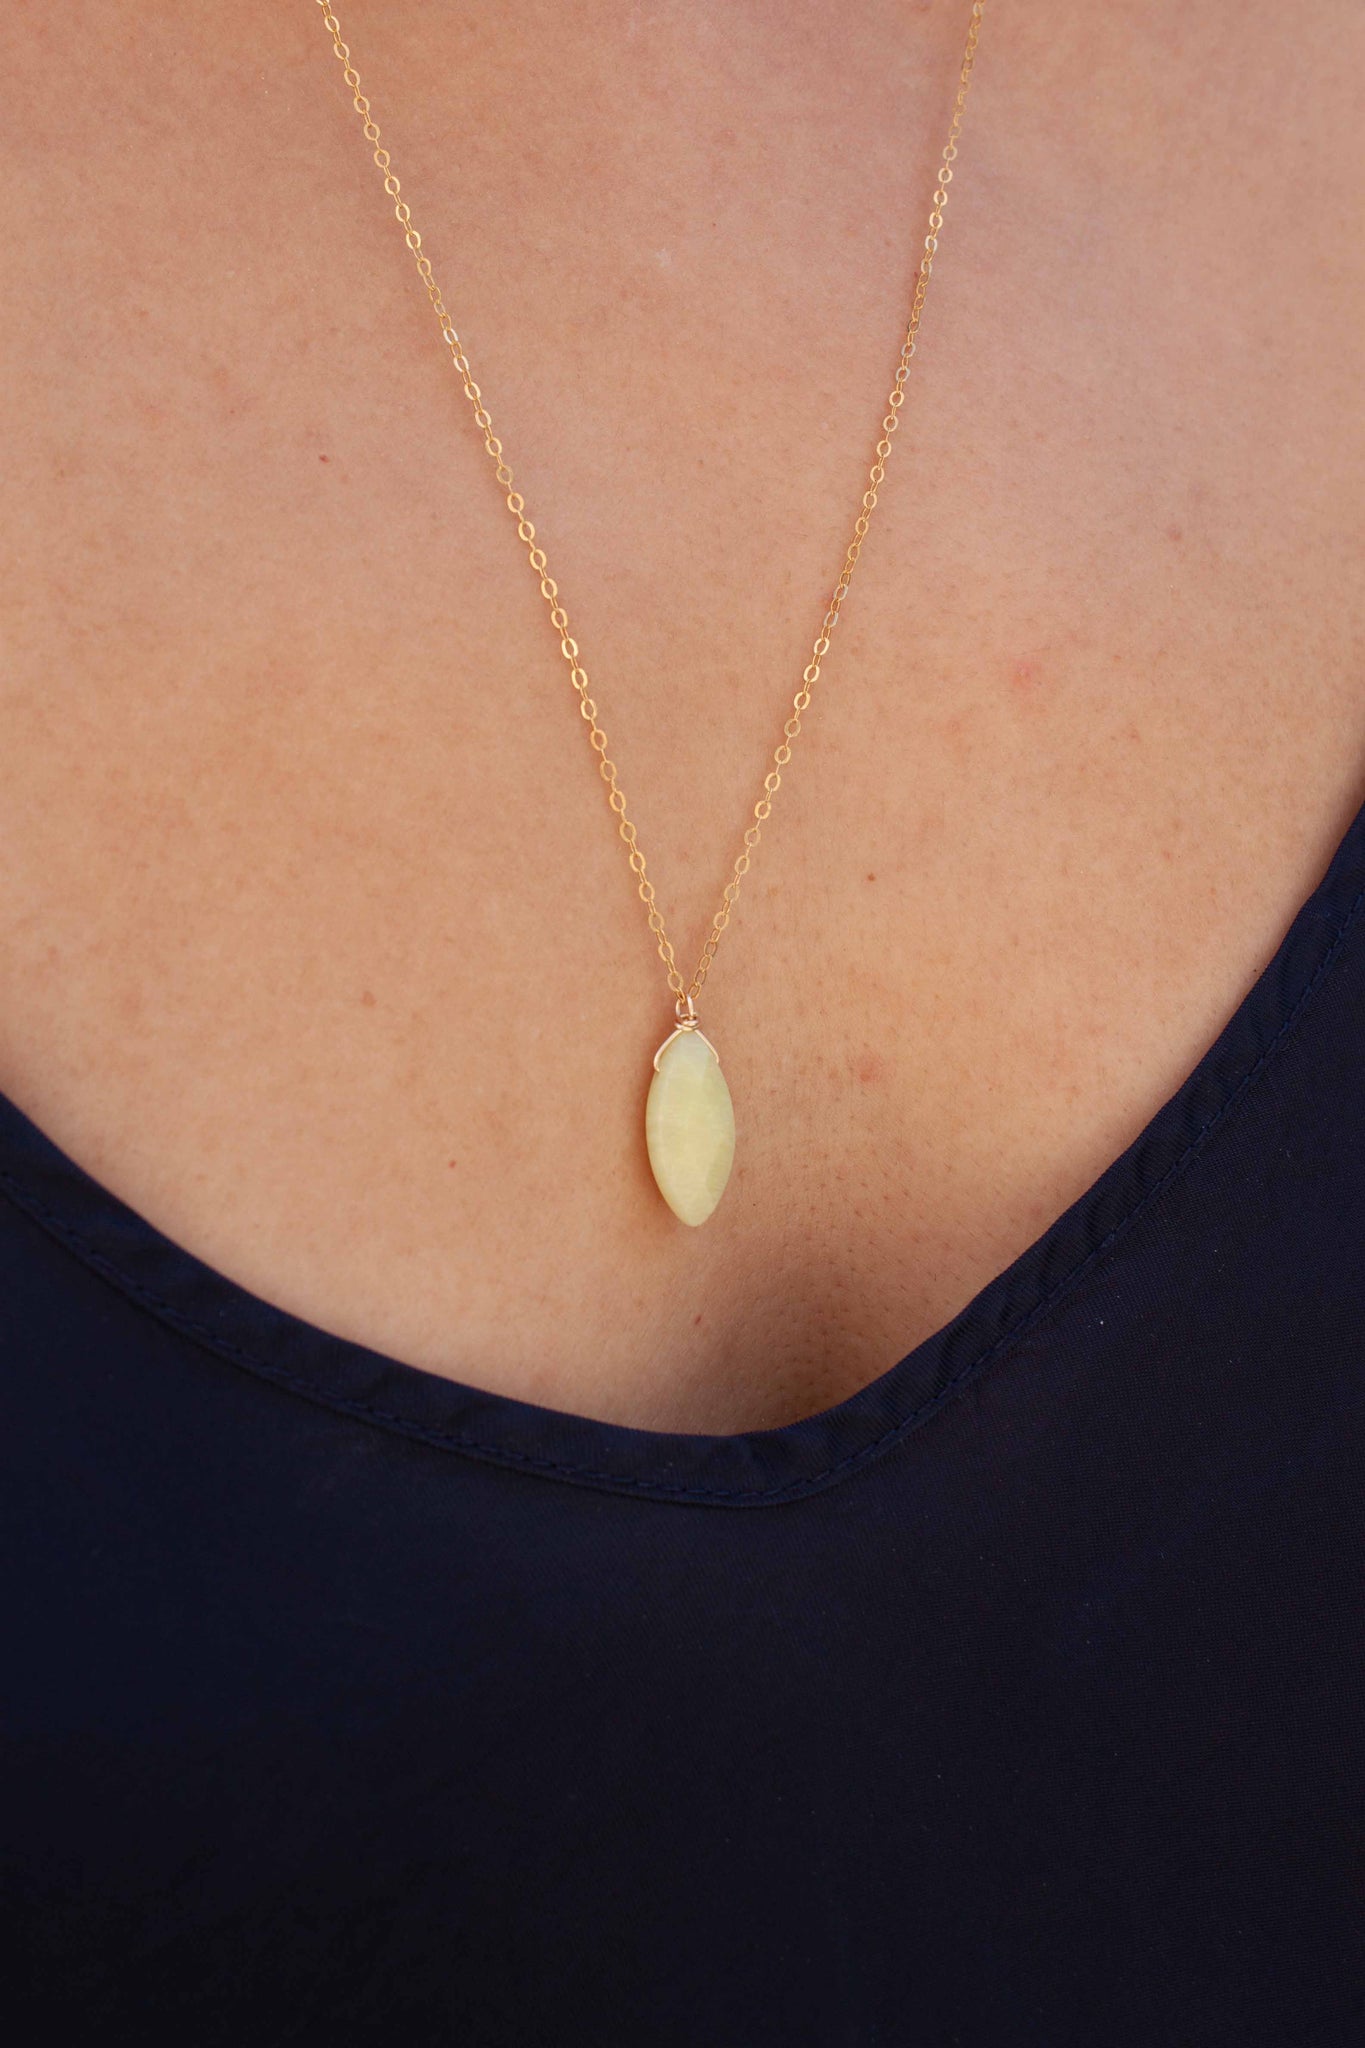 A unique 'pop' of lemon-lime colour to complement your summer whites (or blues, or pinks, or yellows....)! Gold filled necklace with olive jade charm, wrapped in 14 karat gold wire. Handmade in Toronto by kp jewelry co.